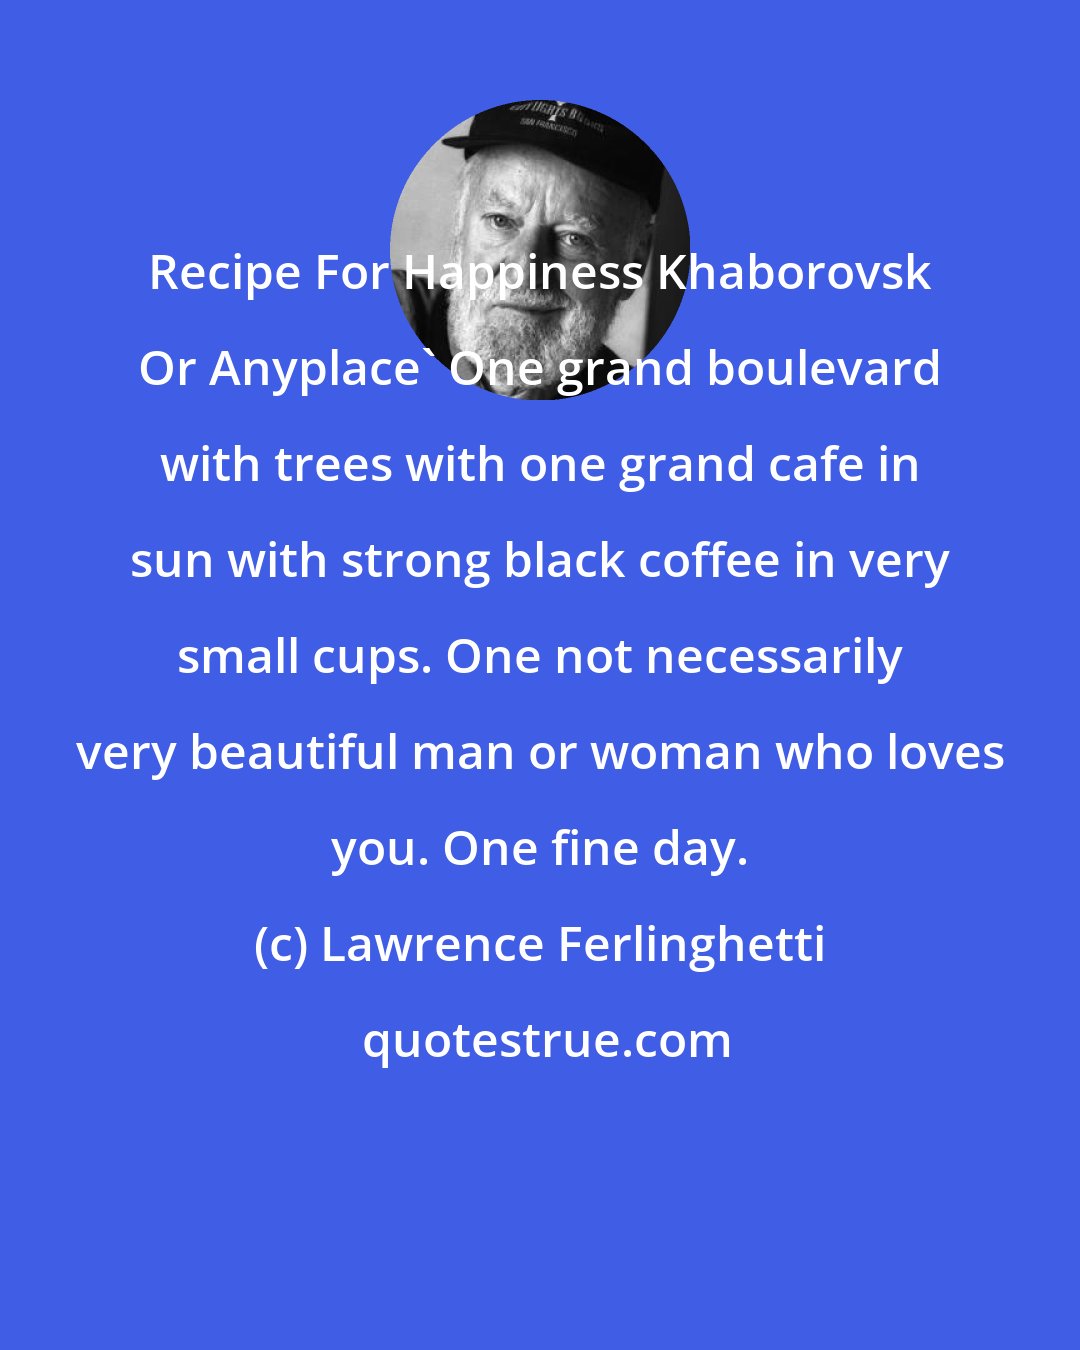 Lawrence Ferlinghetti: Recipe For Happiness Khaborovsk Or Anyplace' One grand boulevard with trees with one grand cafe in sun with strong black coffee in very small cups. One not necessarily very beautiful man or woman who loves you. One fine day.